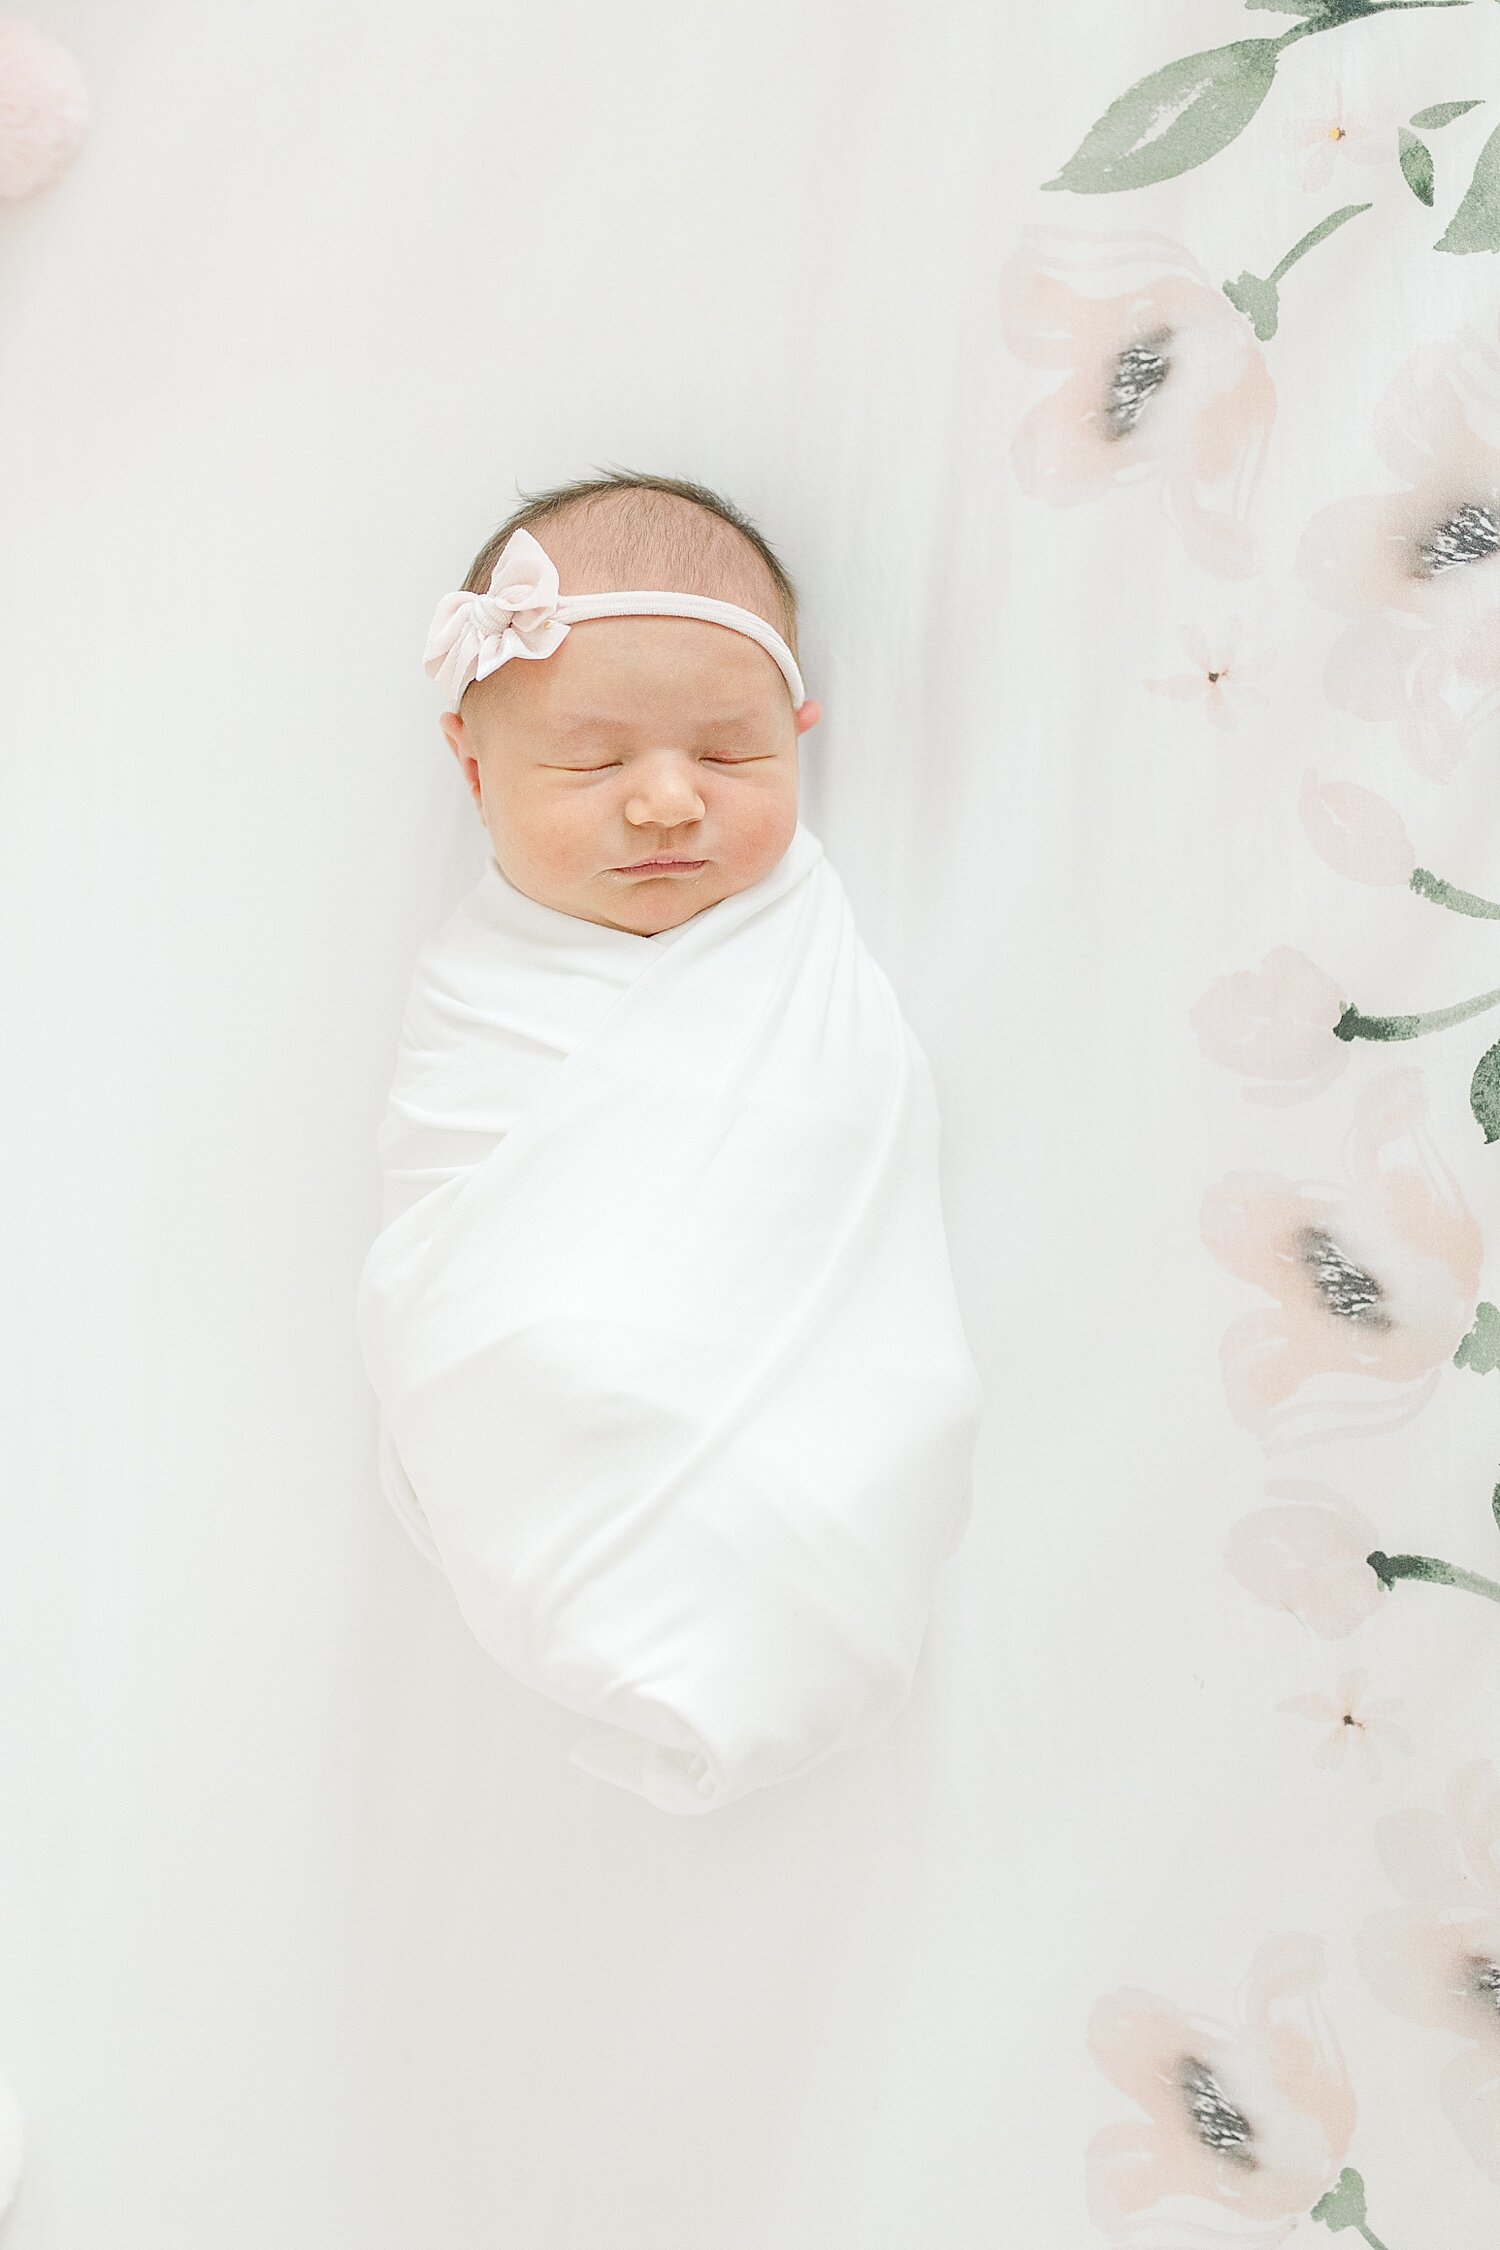 Newborn baby girl laying in crib on floral sheet. Photo by Kristin Wood Photography.